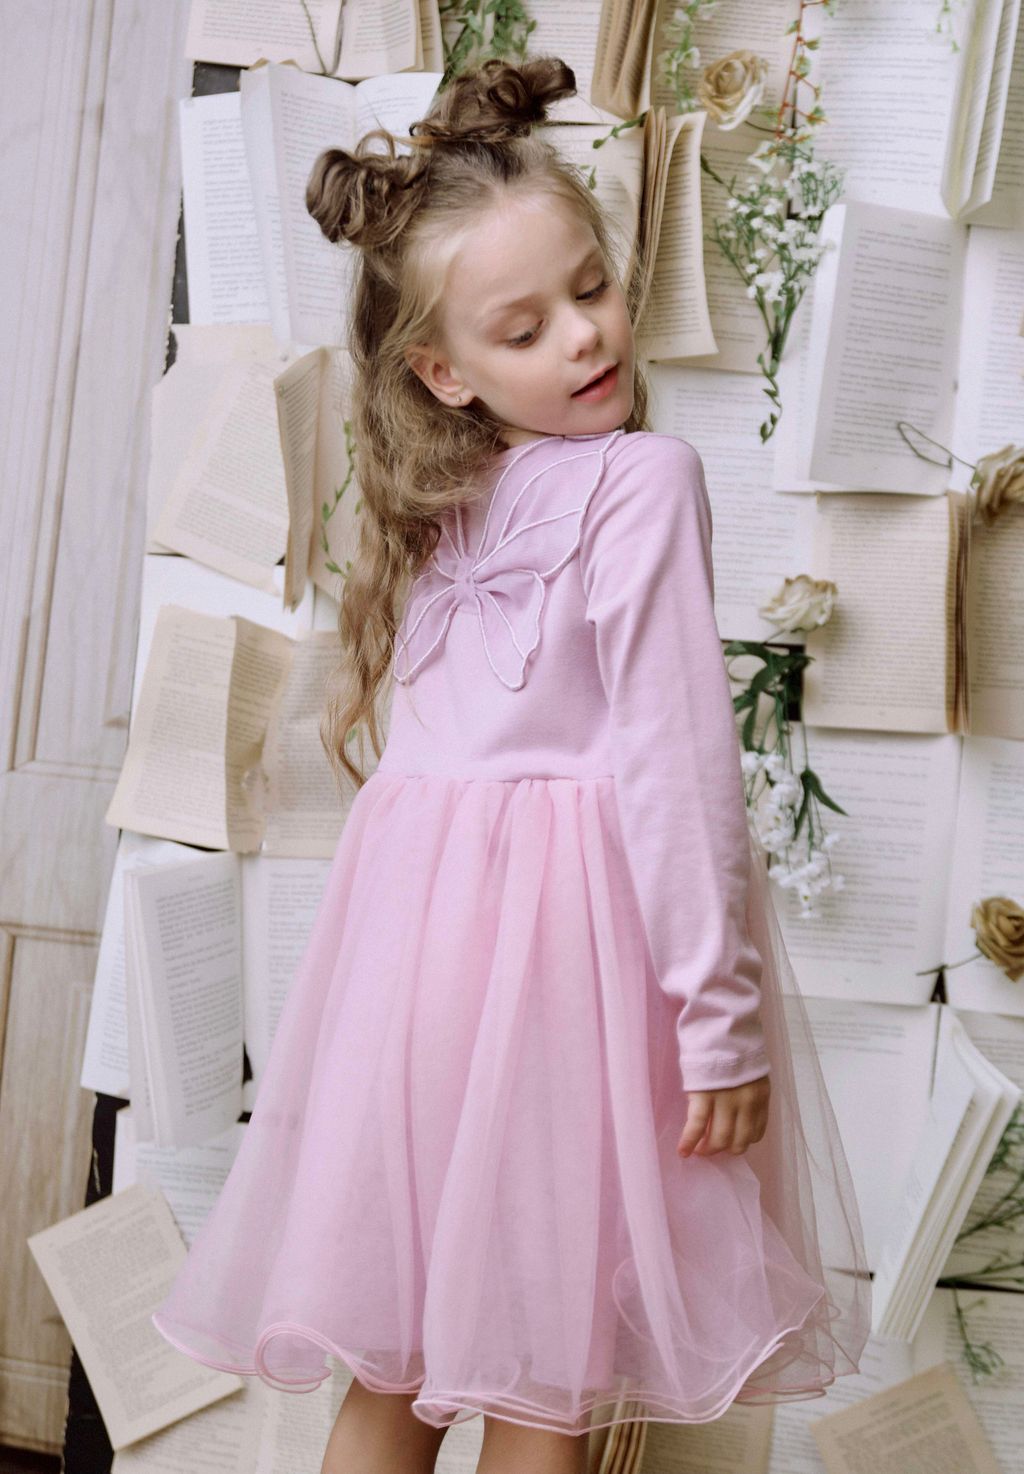 DOLLY by Le Petit Tom ® BUTTERFLY WINGS TUTU DRESS pink